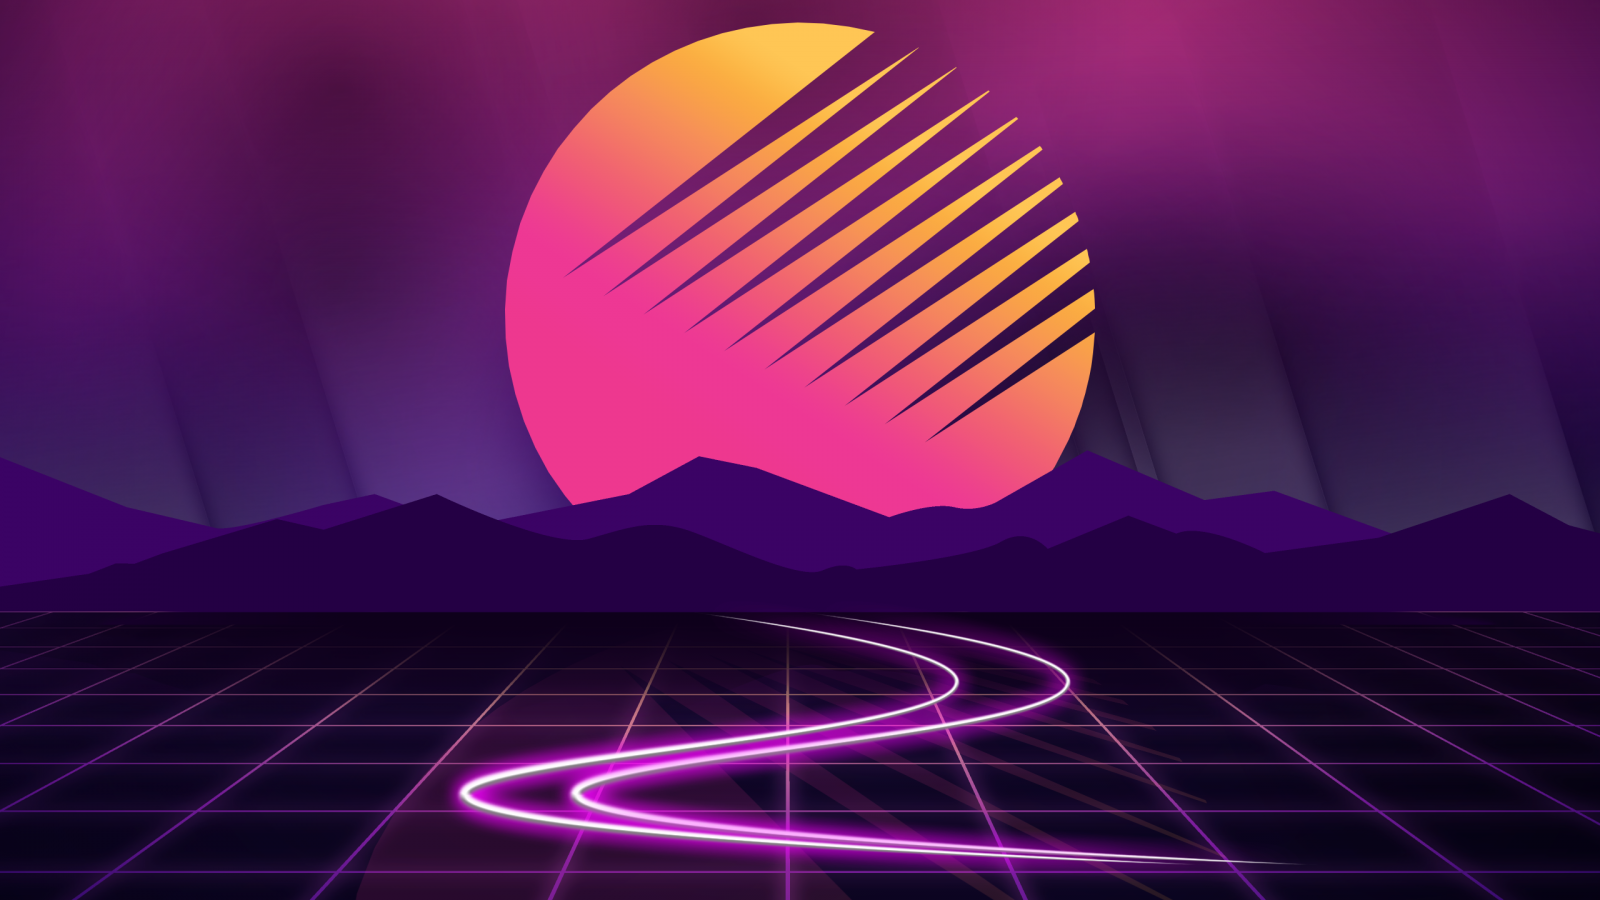 Wallpaper Moon, Mountains, Neon, Cyberwave, Outrun, HD, Creative Graphics,. Wallpaper for iPhone, Android, Mobile and Desktop